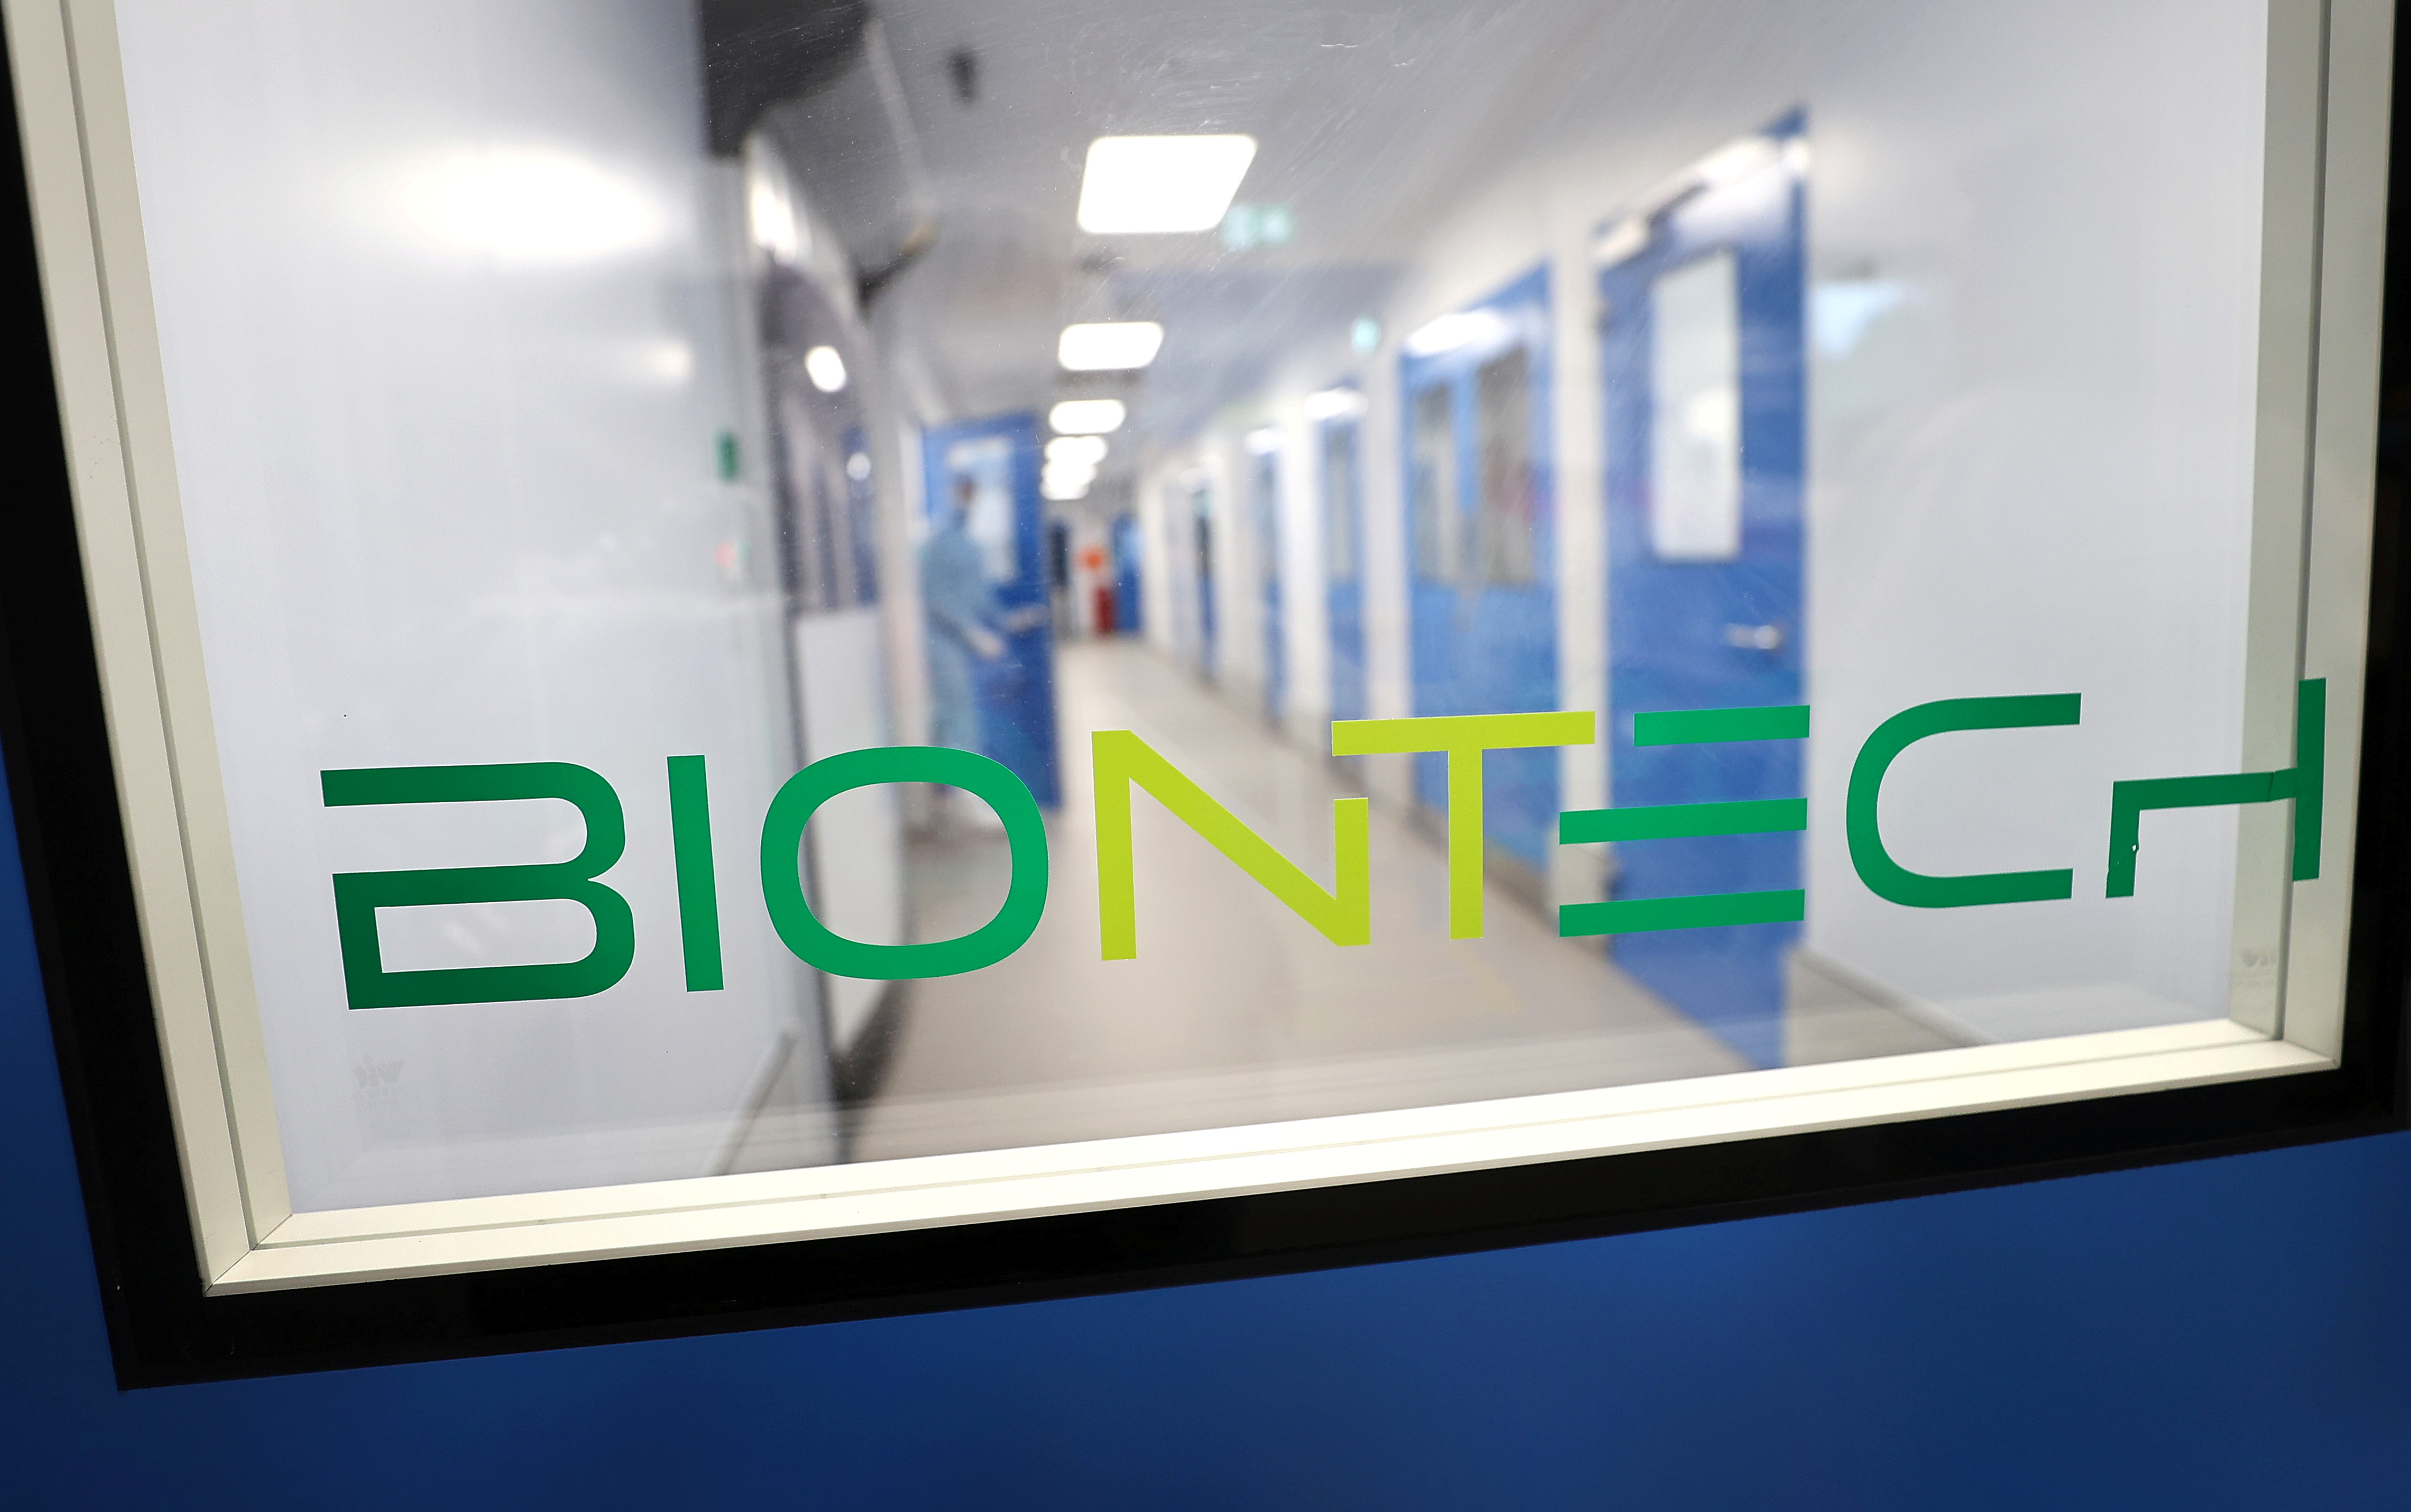 BioNTech COVID-19 vaccine production facility in Marburg